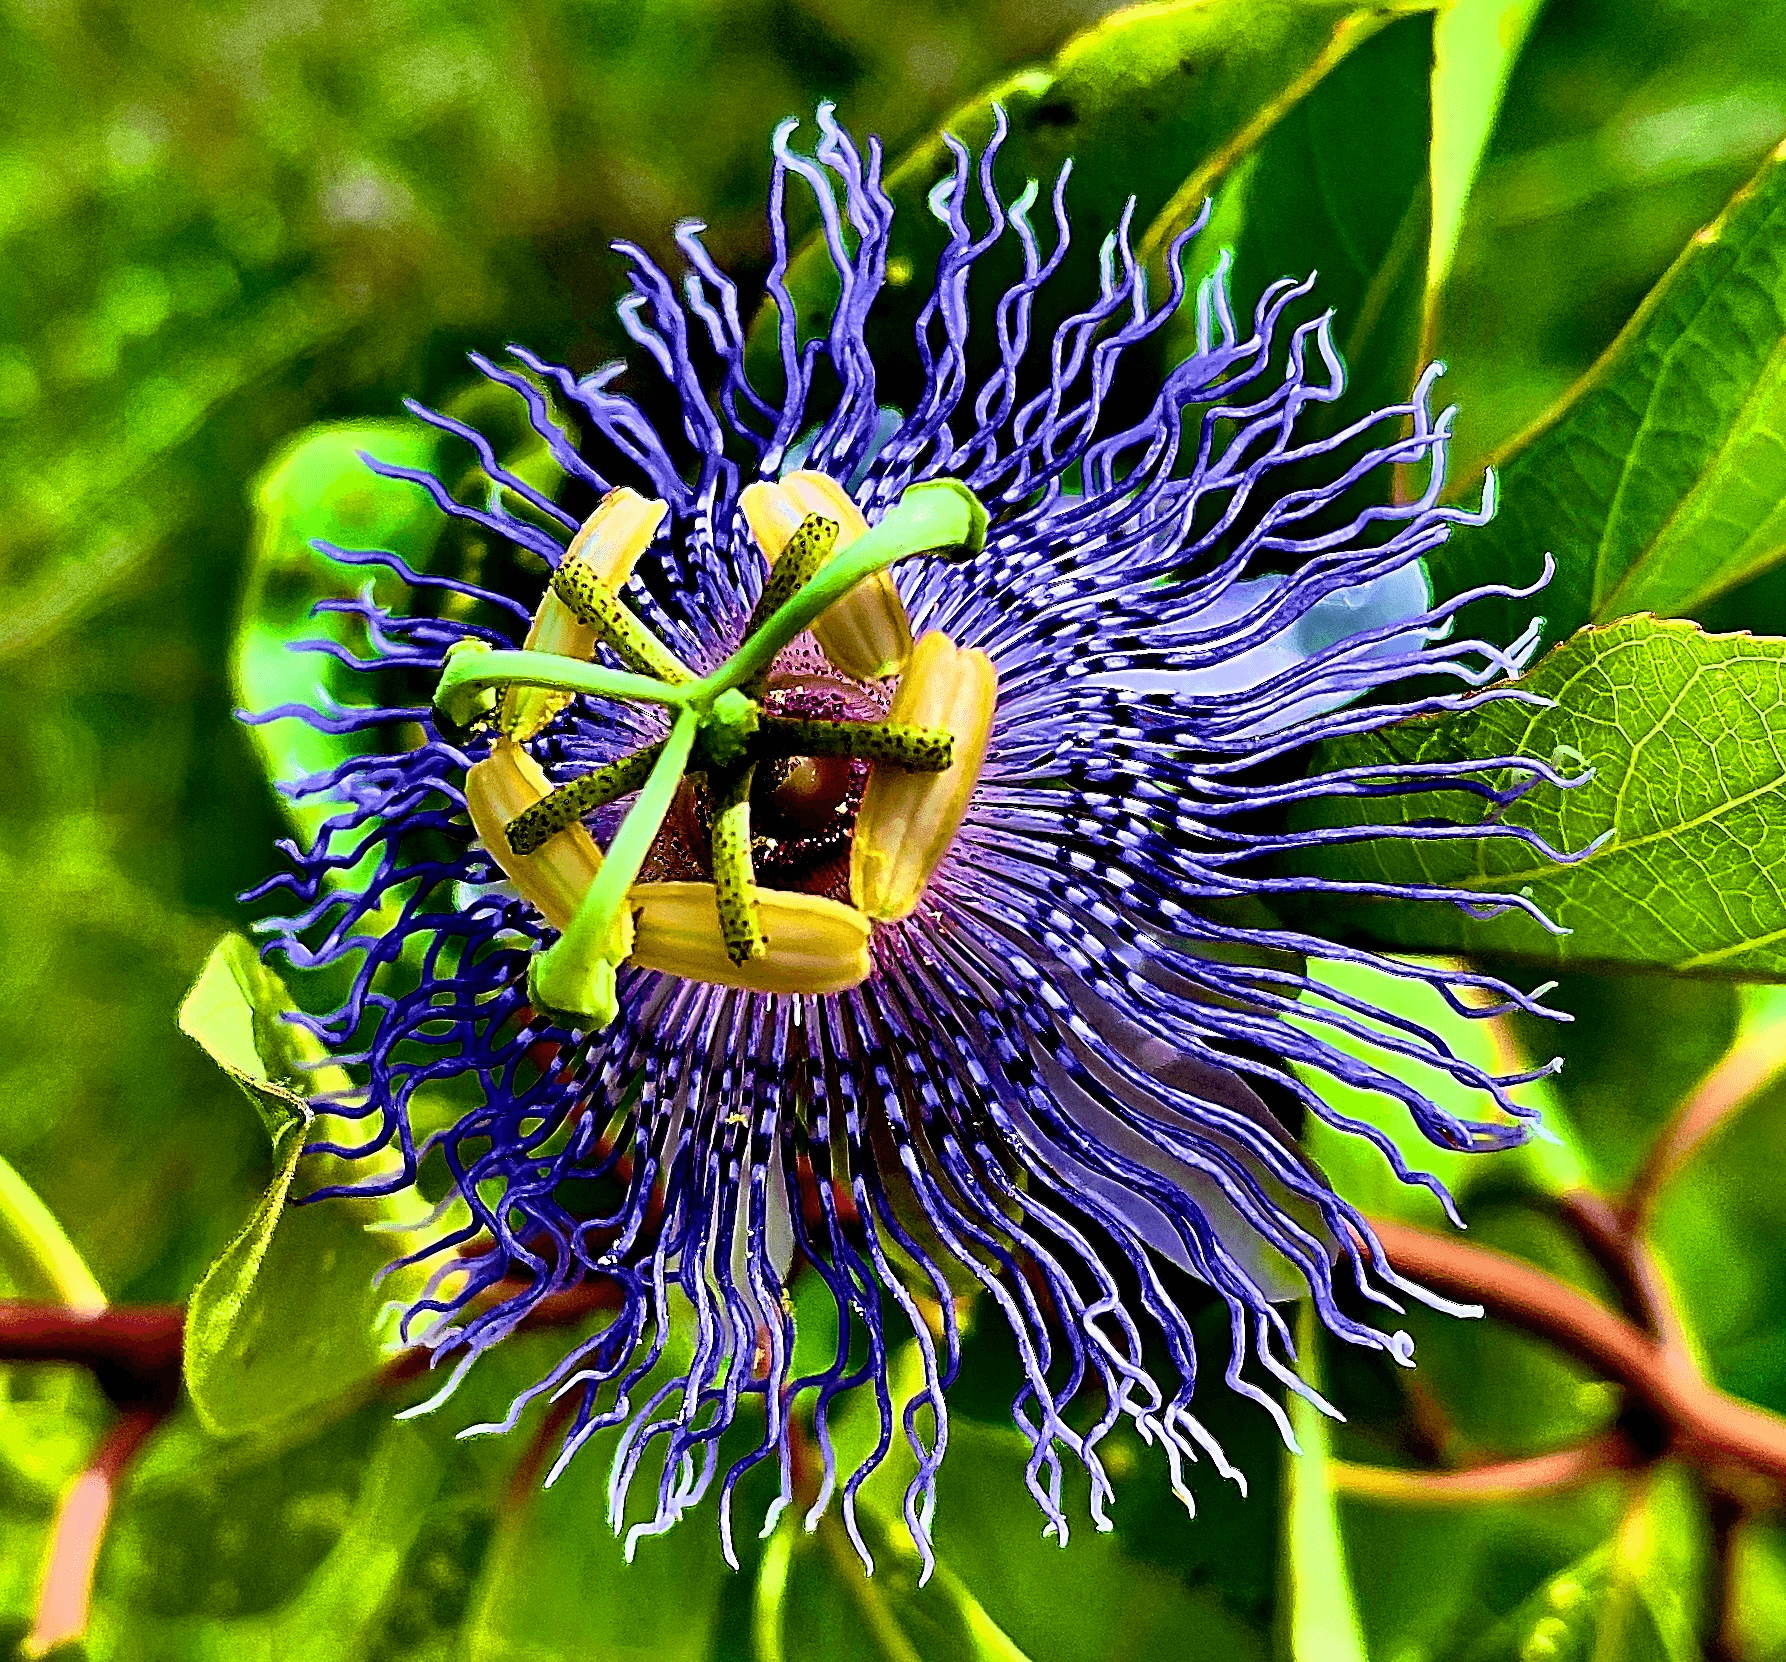 Seed Poem #26: The Passion Flower